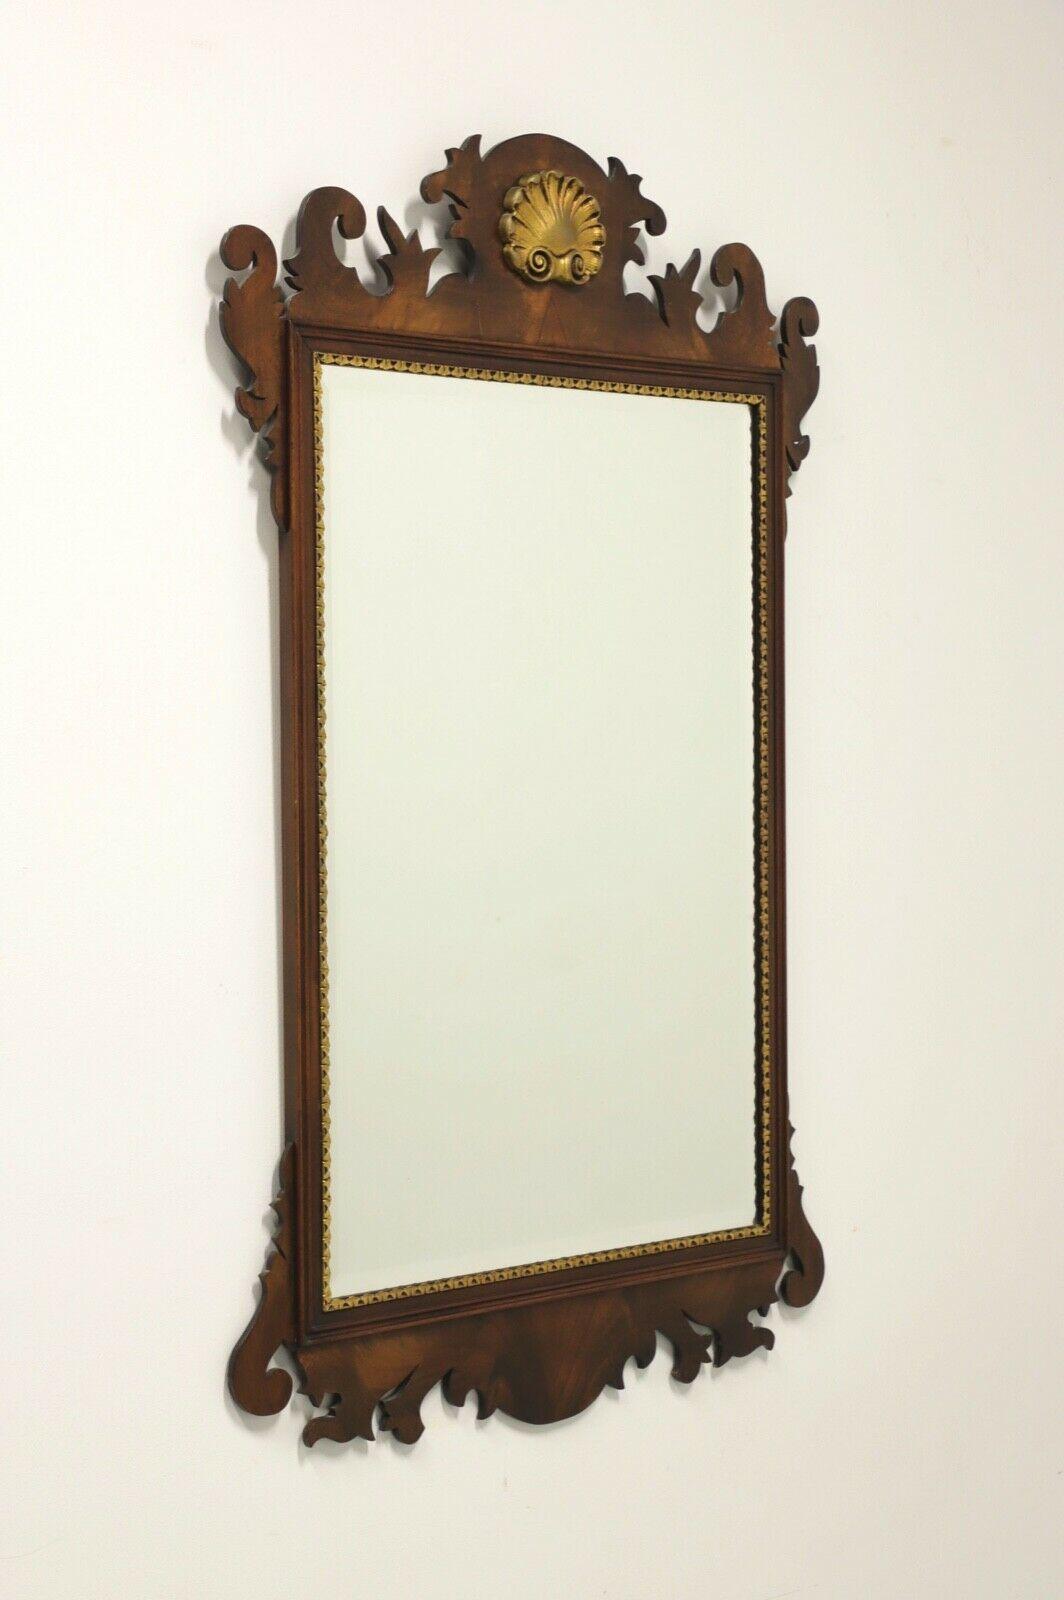 HENKEL HARRIS H-6 29 Mahogany Chippendale Wall Mirror - A For Sale 2